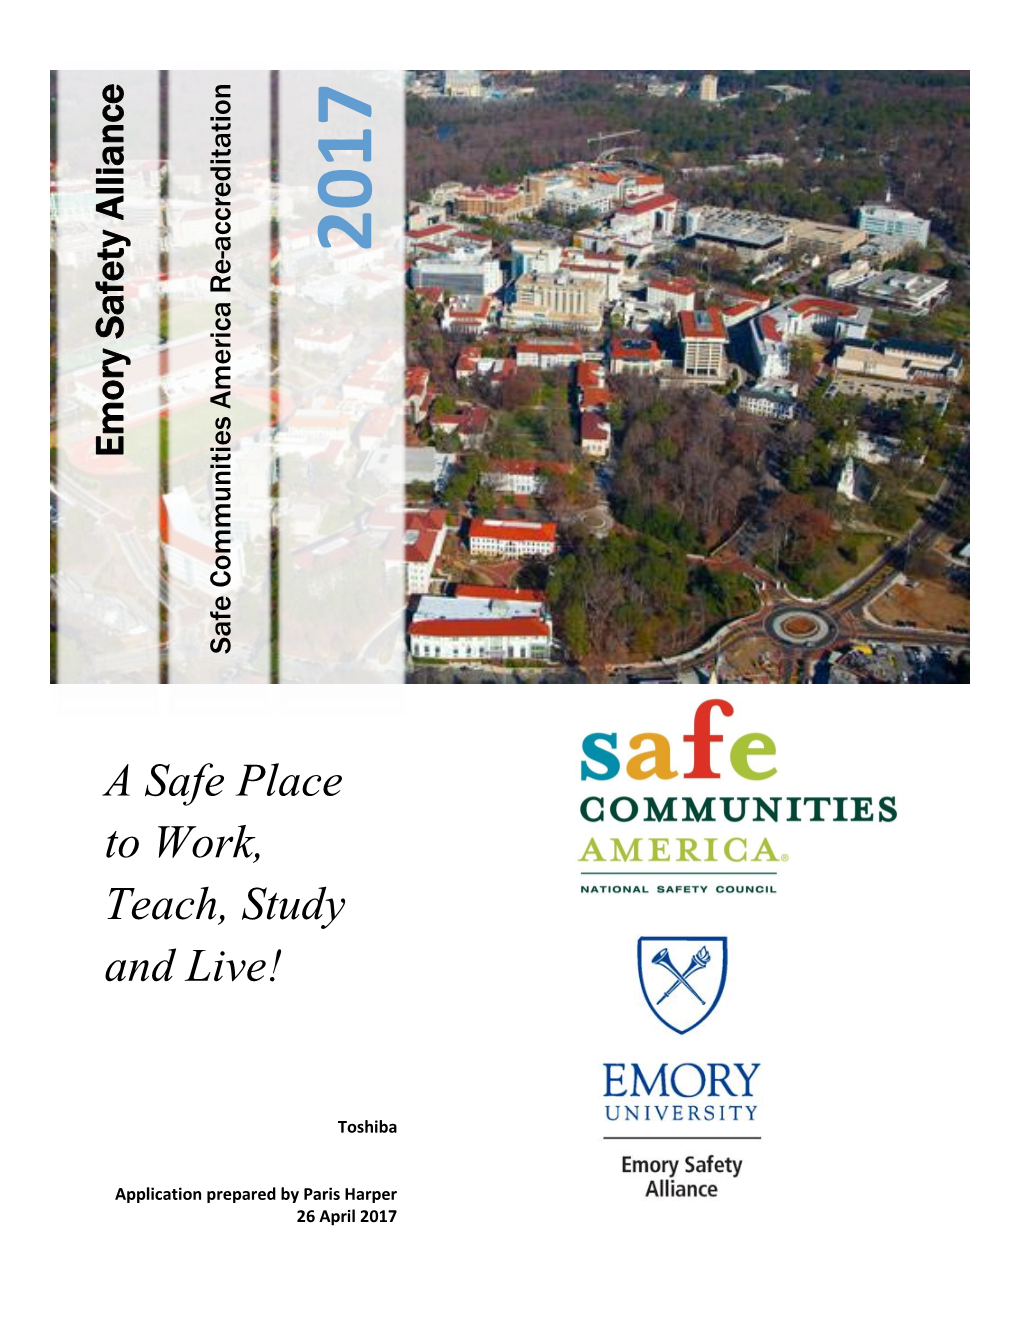 Emory Safety Alliance Members